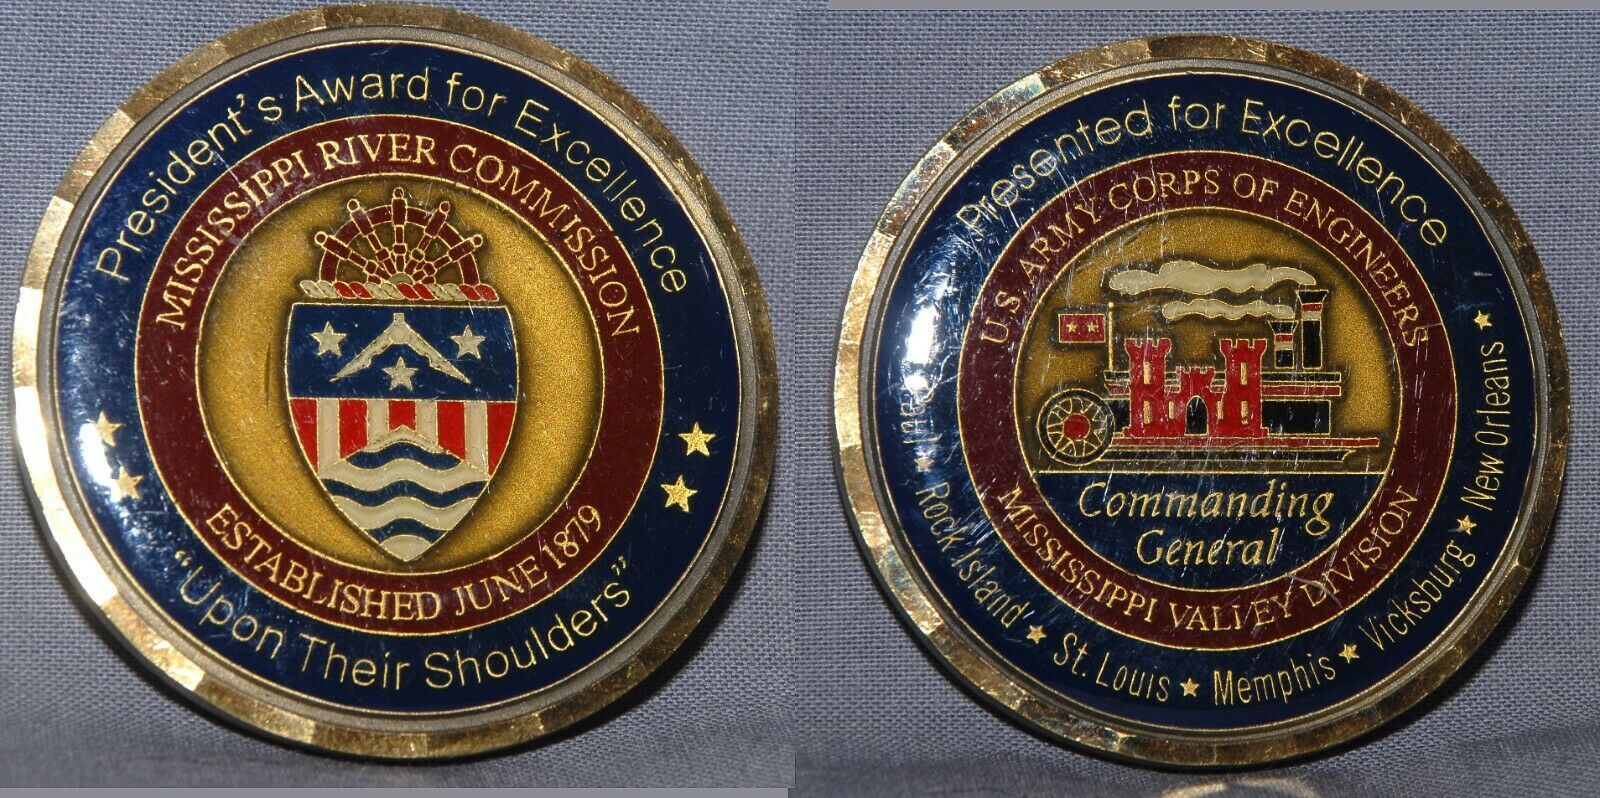 Primary image for BIG ARMY ENGINEERS MISSISSIPPI VALLEY COMMANDING GENERAL & PRESIDENTS AWARD COIN